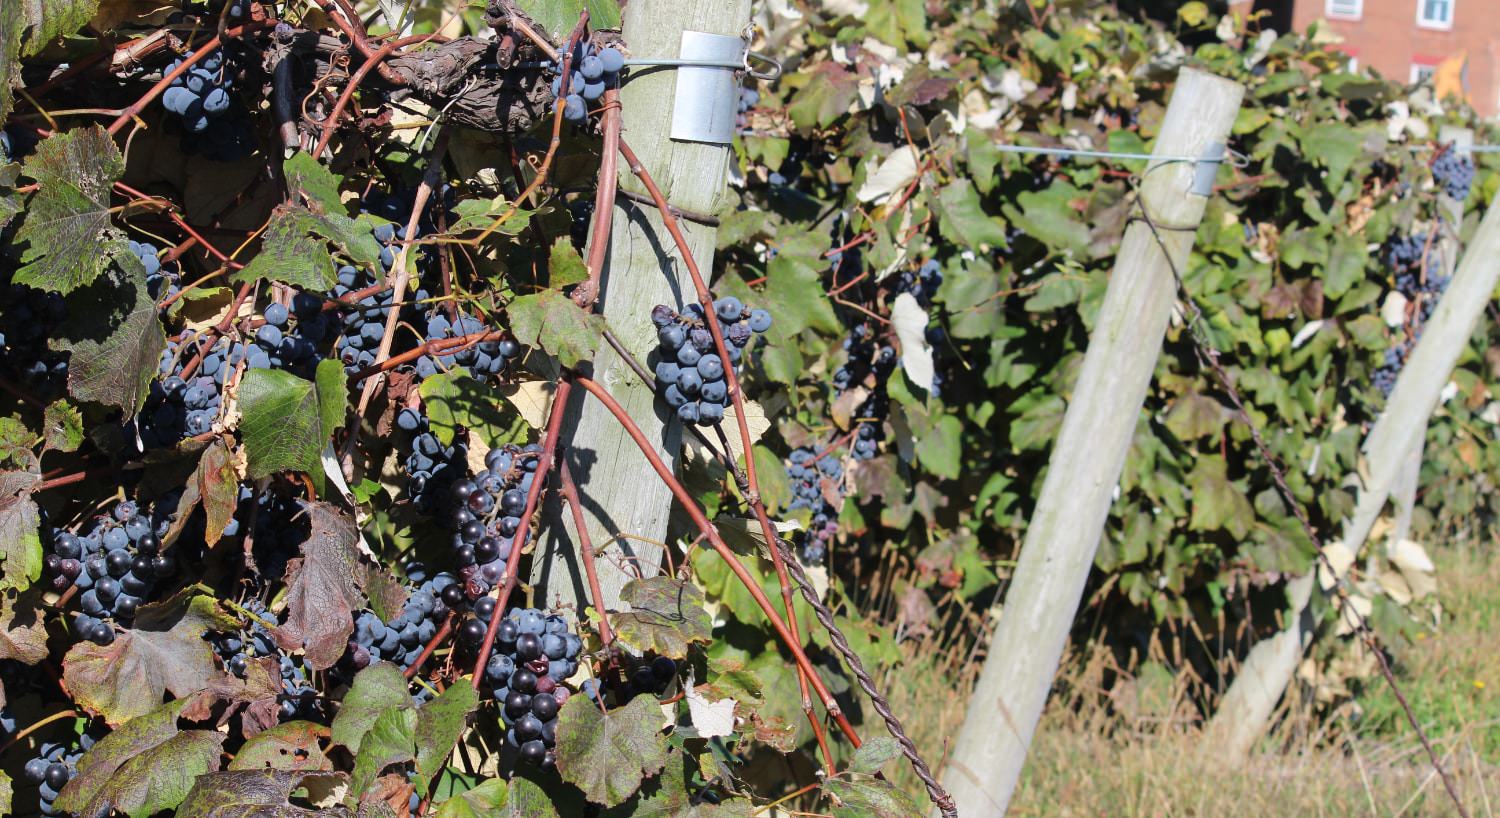 Close up view of purple grapes growing on green vines